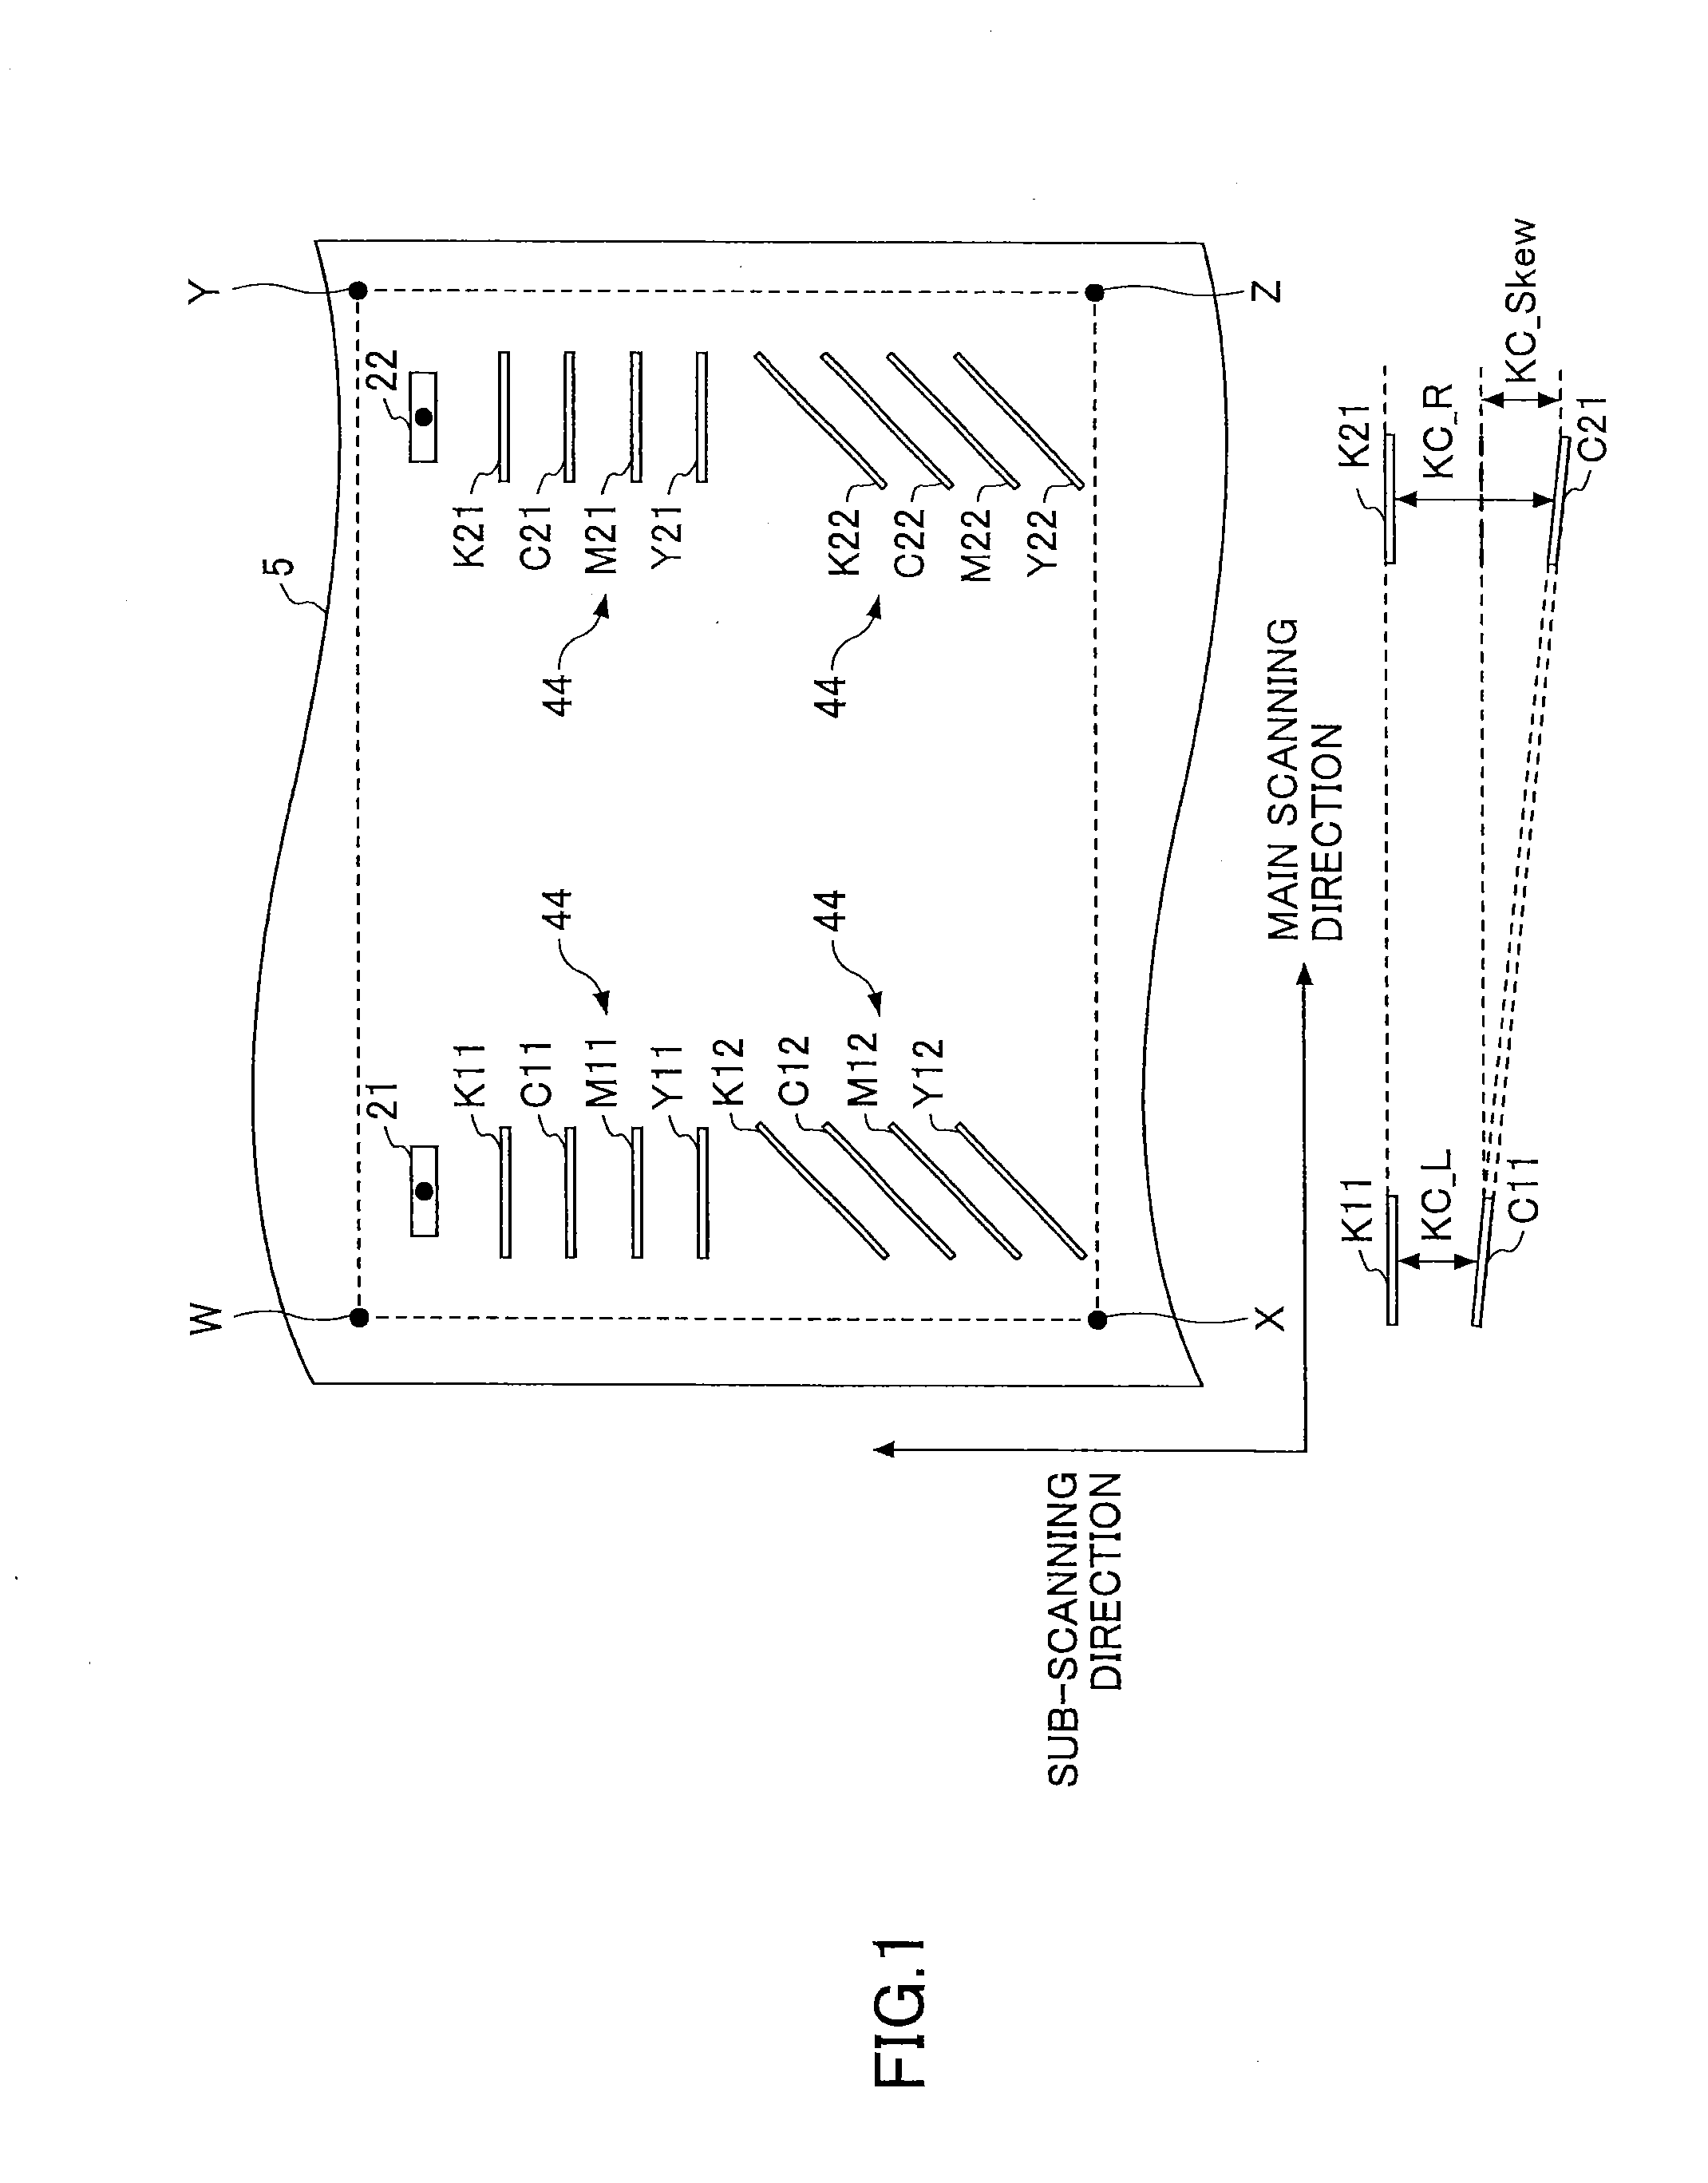 Image forming apparatus and image correction method